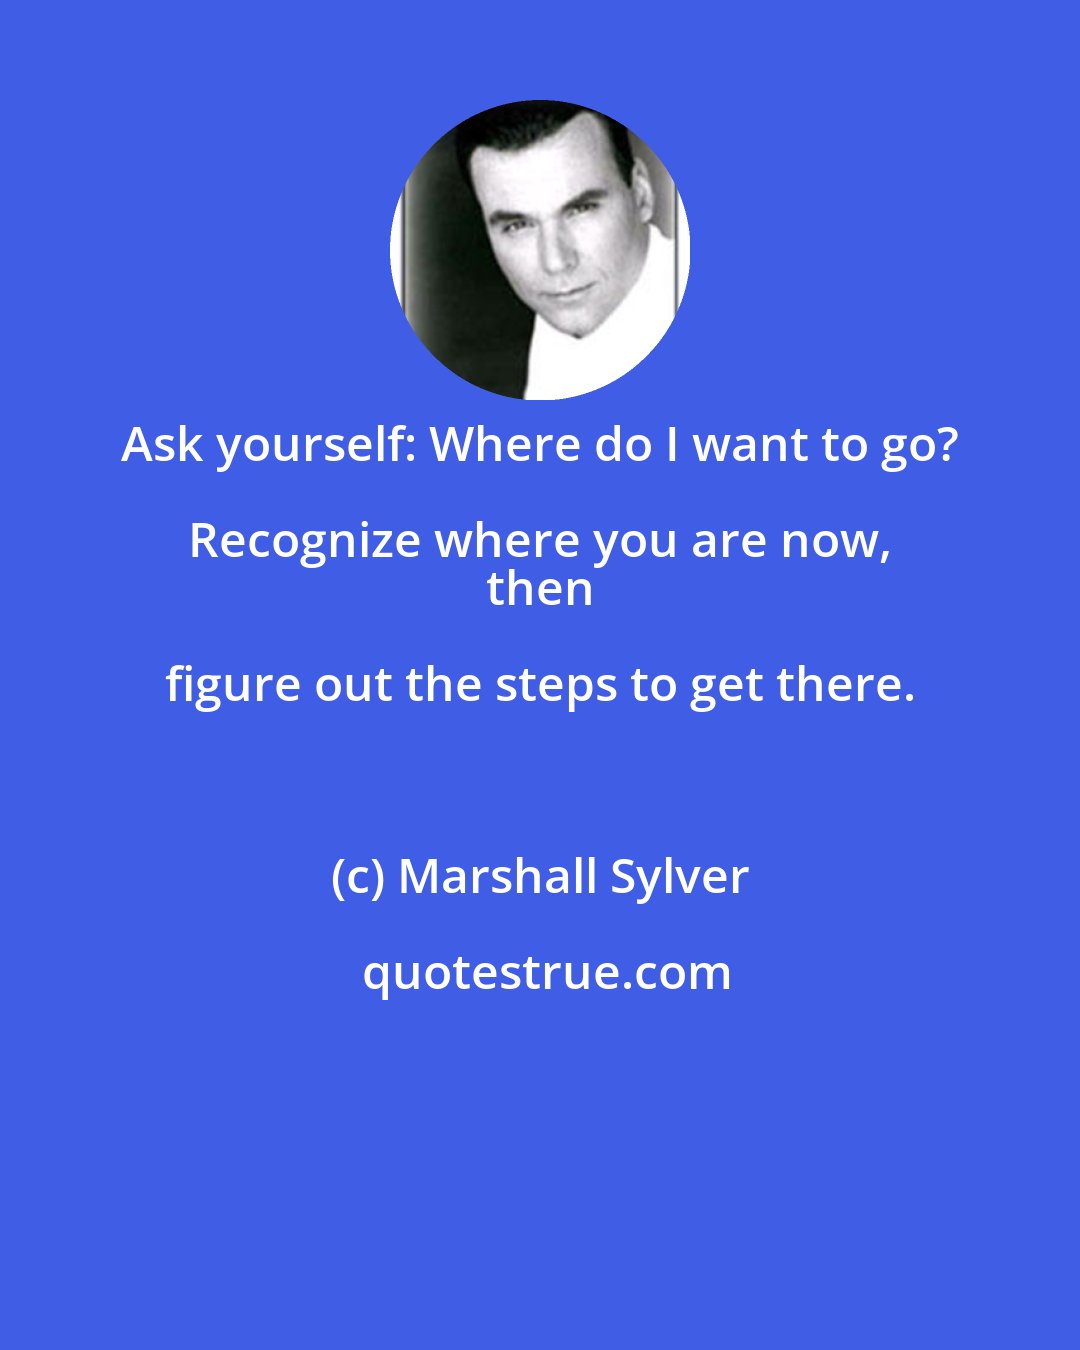 Marshall Sylver: Ask yourself: Where do I want to go? Recognize where you are now, 
 then figure out the steps to get there.